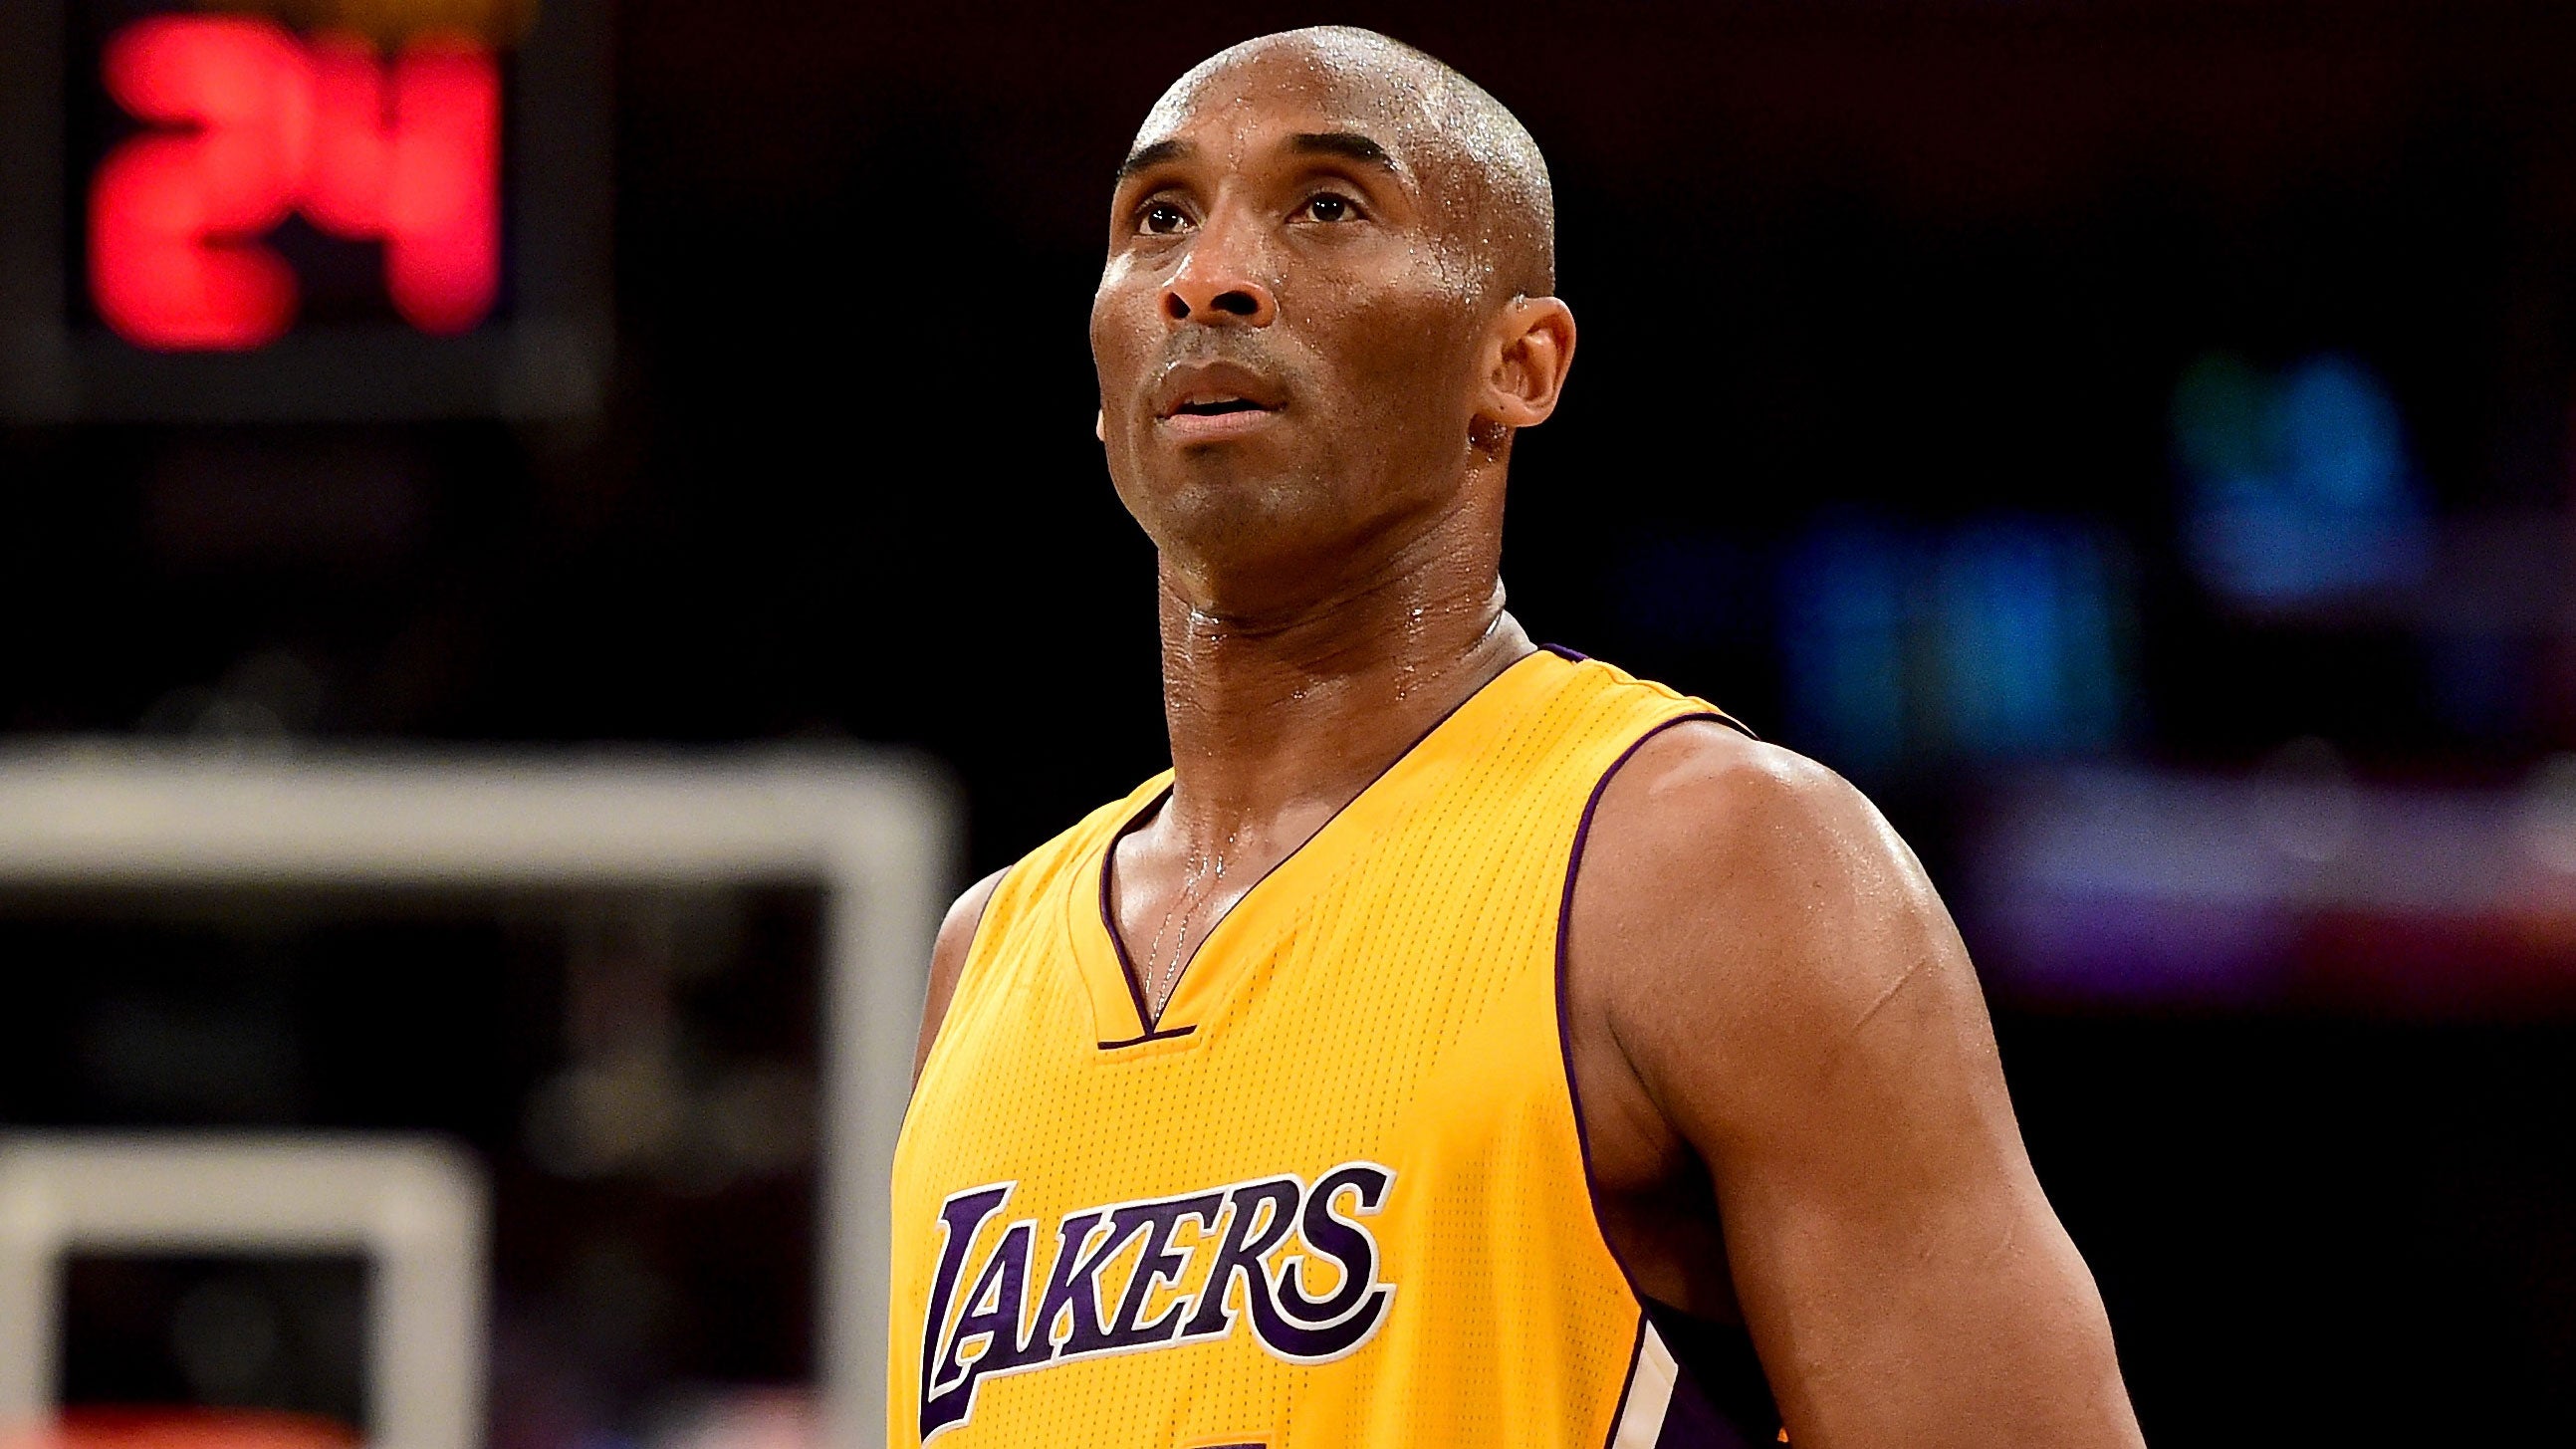 Kobe Bryant Day: What 'Mamba Mentality' Meant in His Own Words